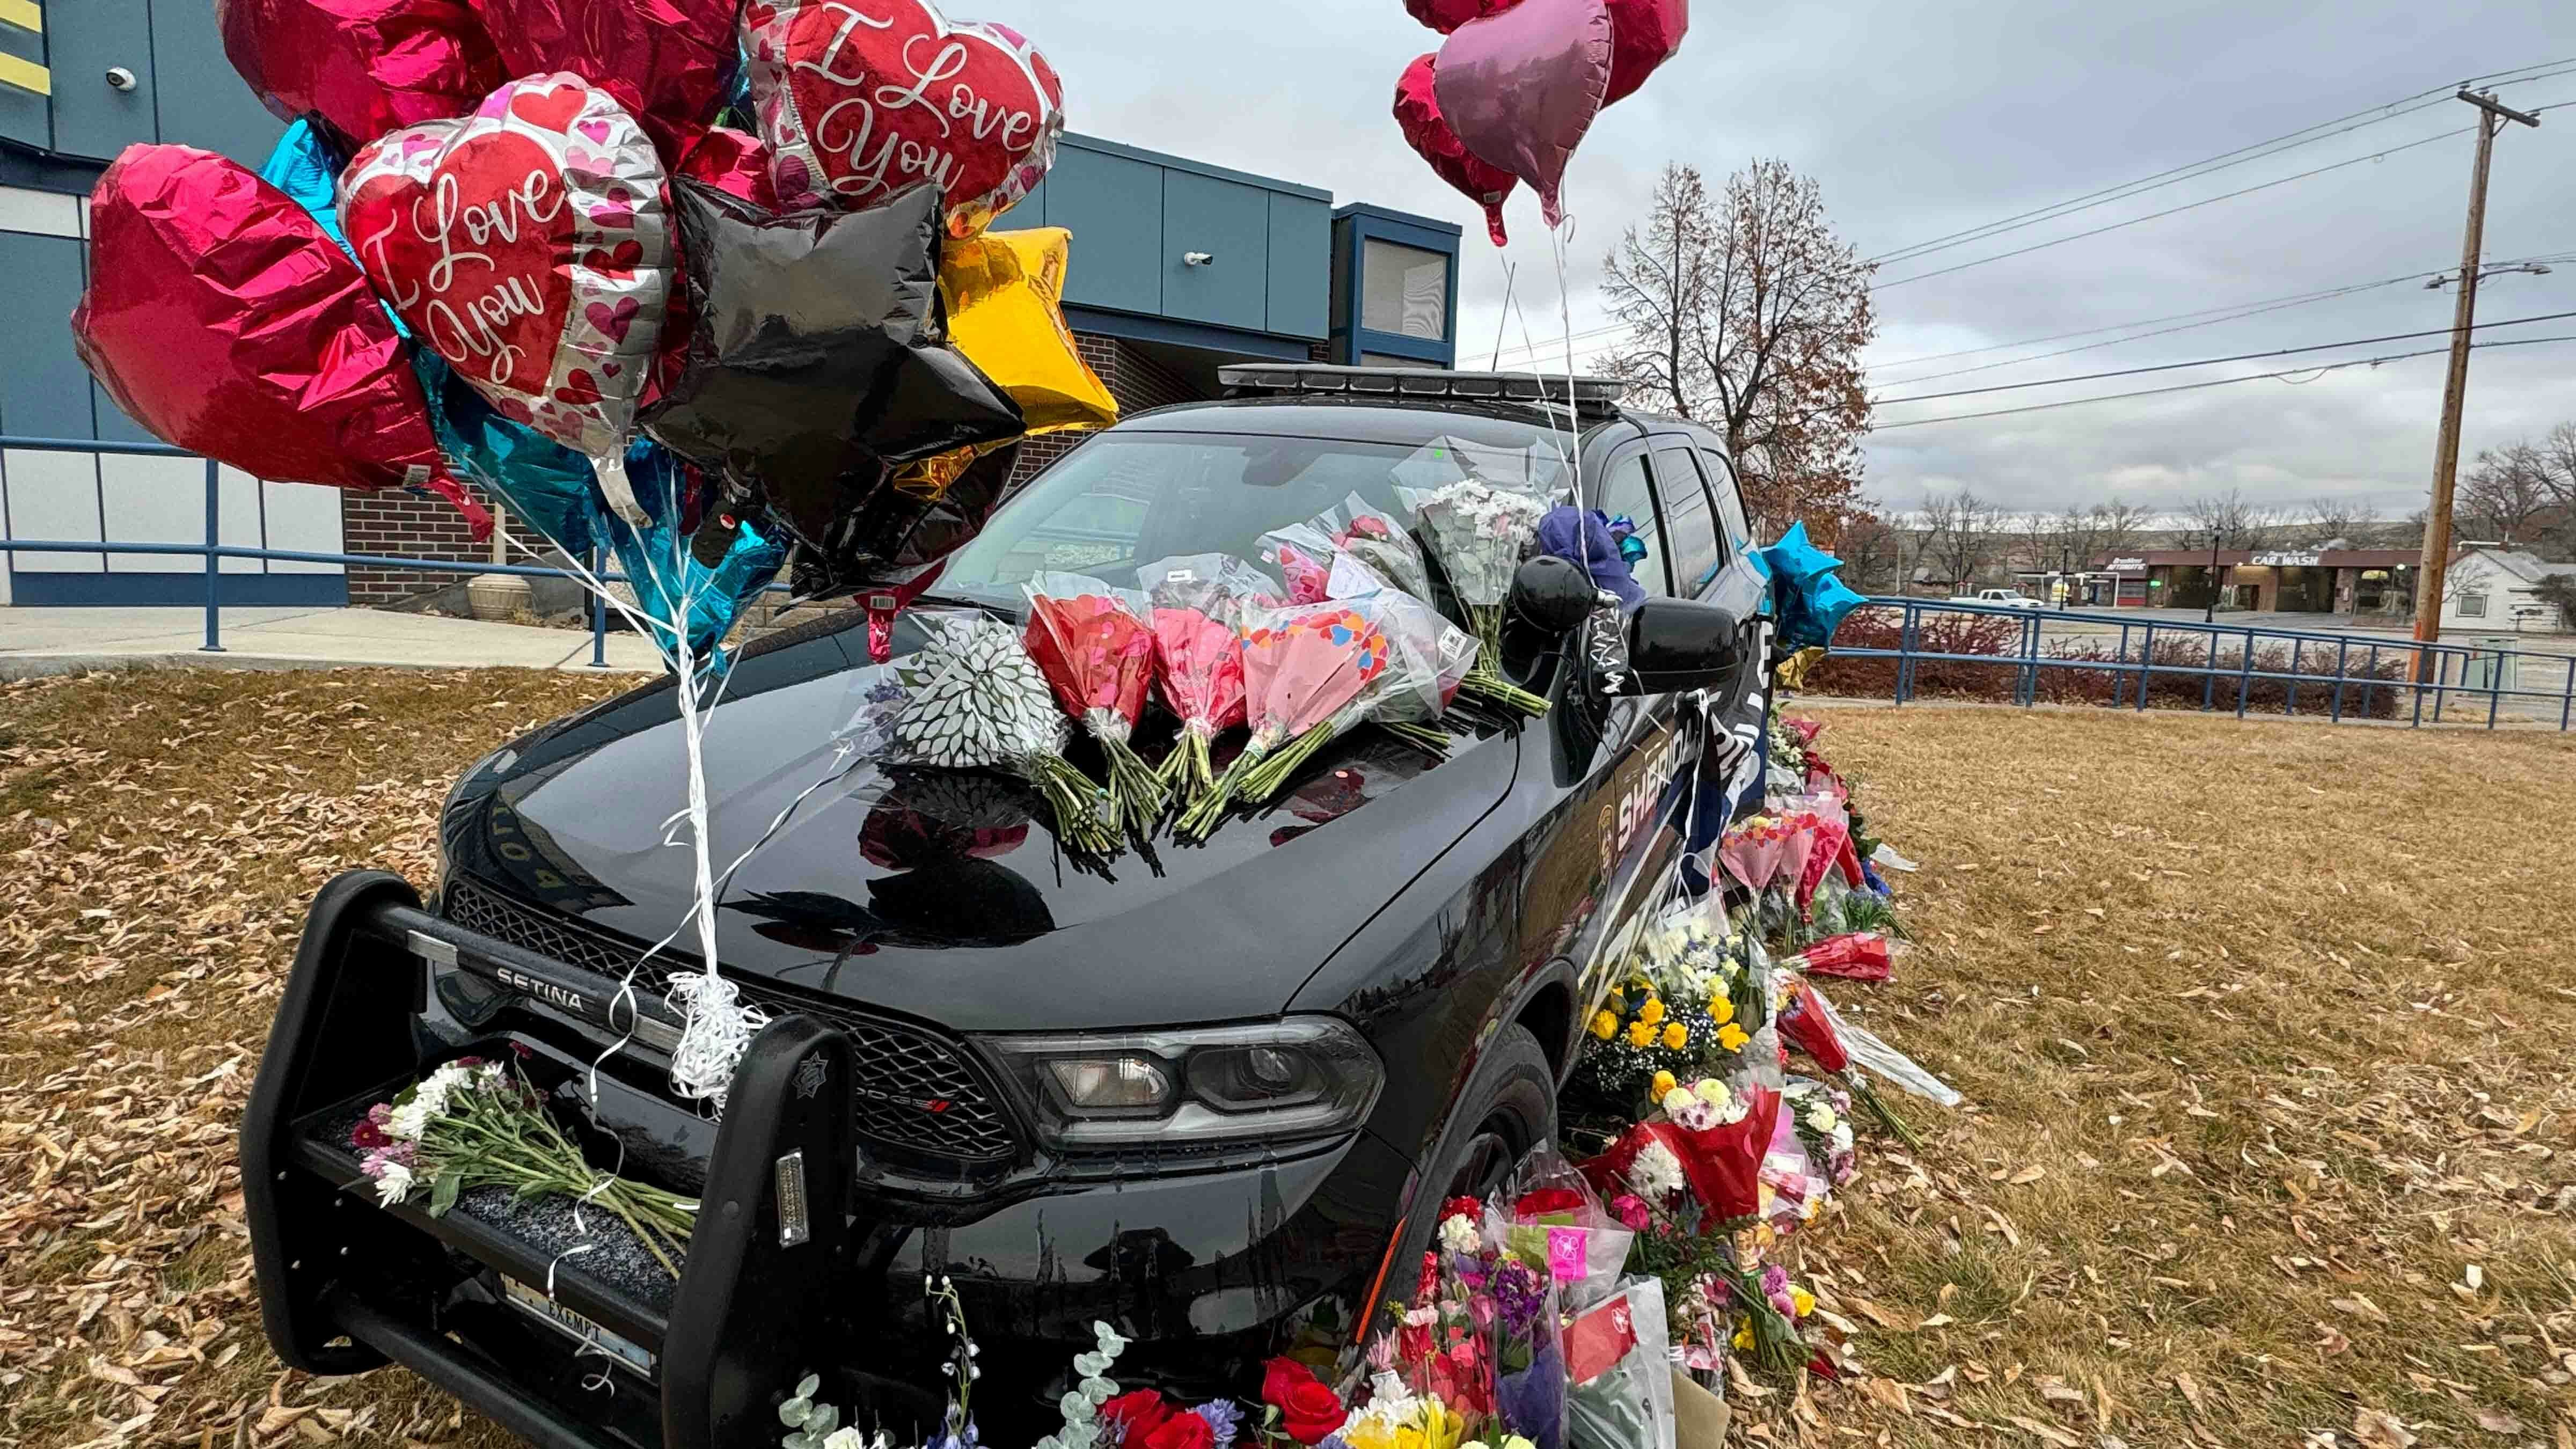 Memorial for Sheridan Police Sgt. Nevada Krinkee at the Sheridan Police Station on Feb 14, 2024